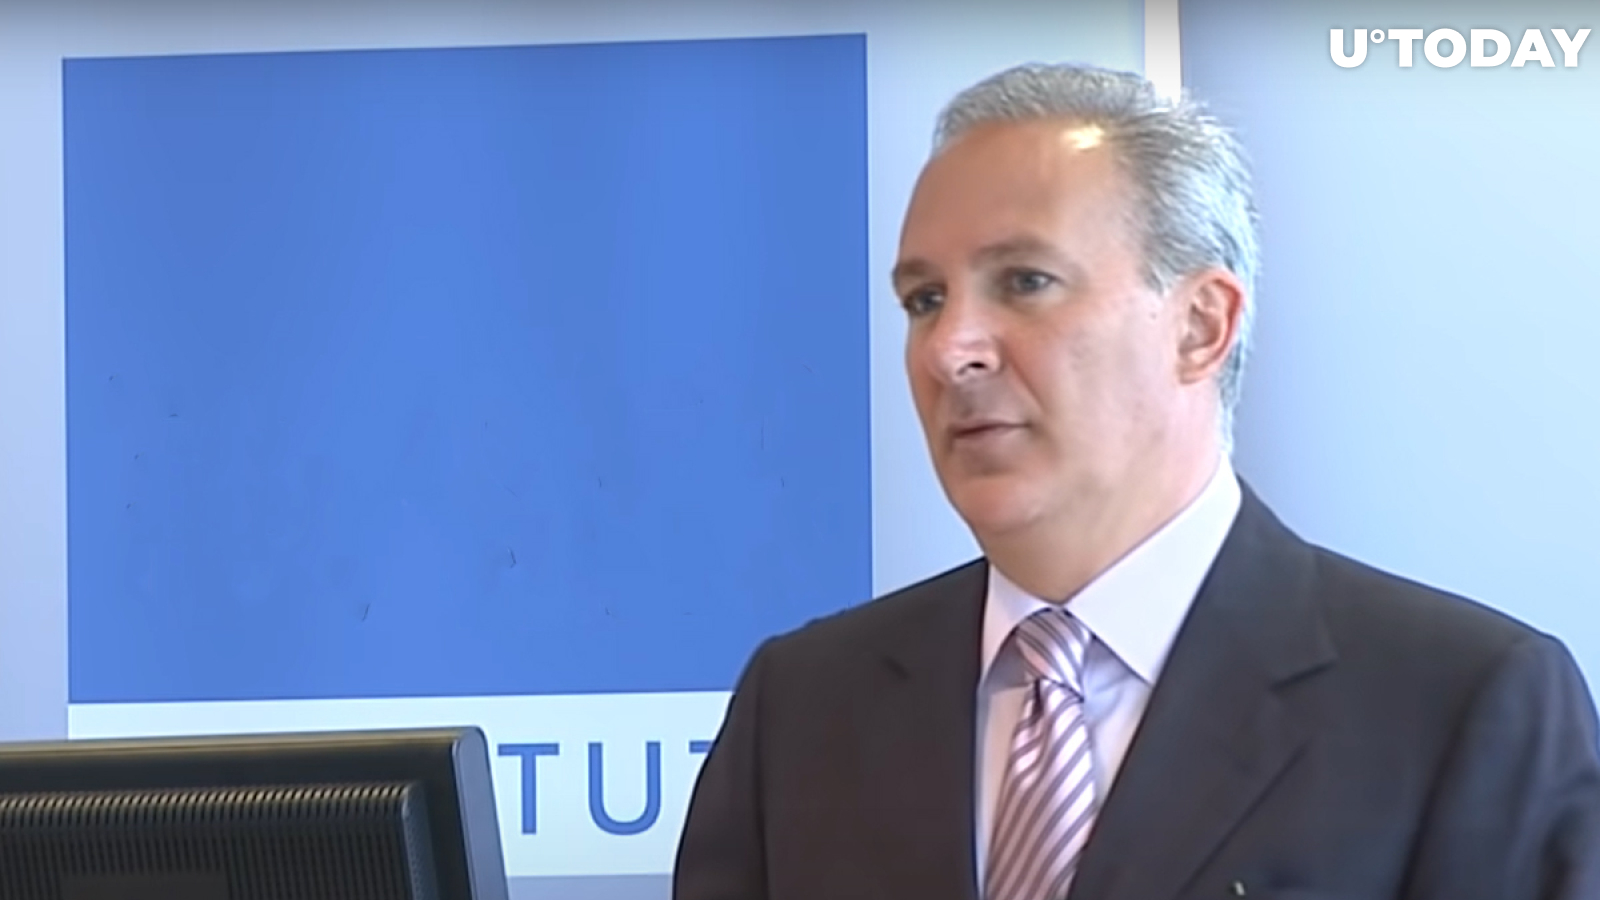 Peter Schiff Says Crypto May Lead to Higher Consumer Prices, Here’s How